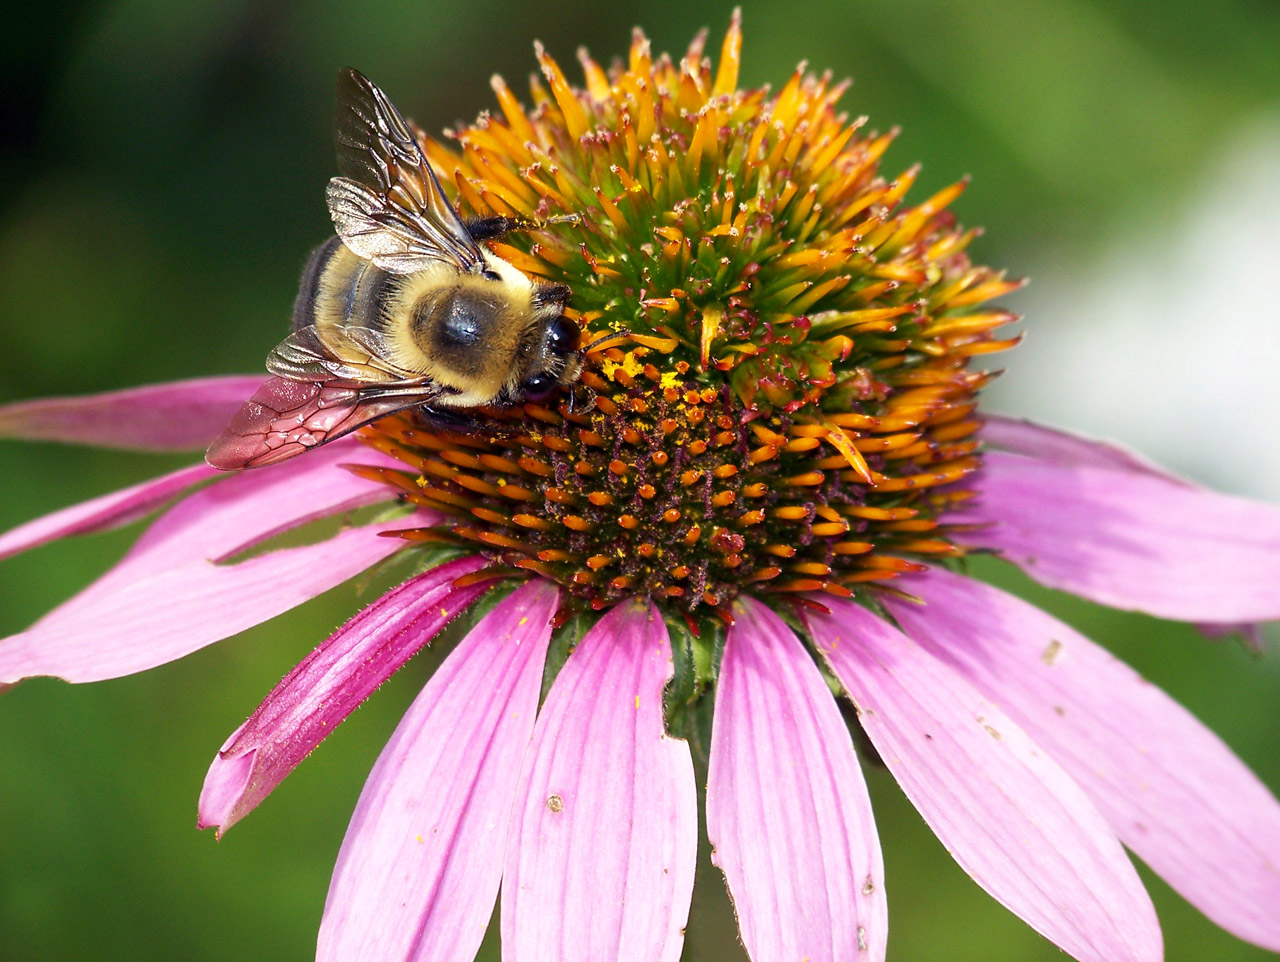 A bumblebee on a pink coneflower